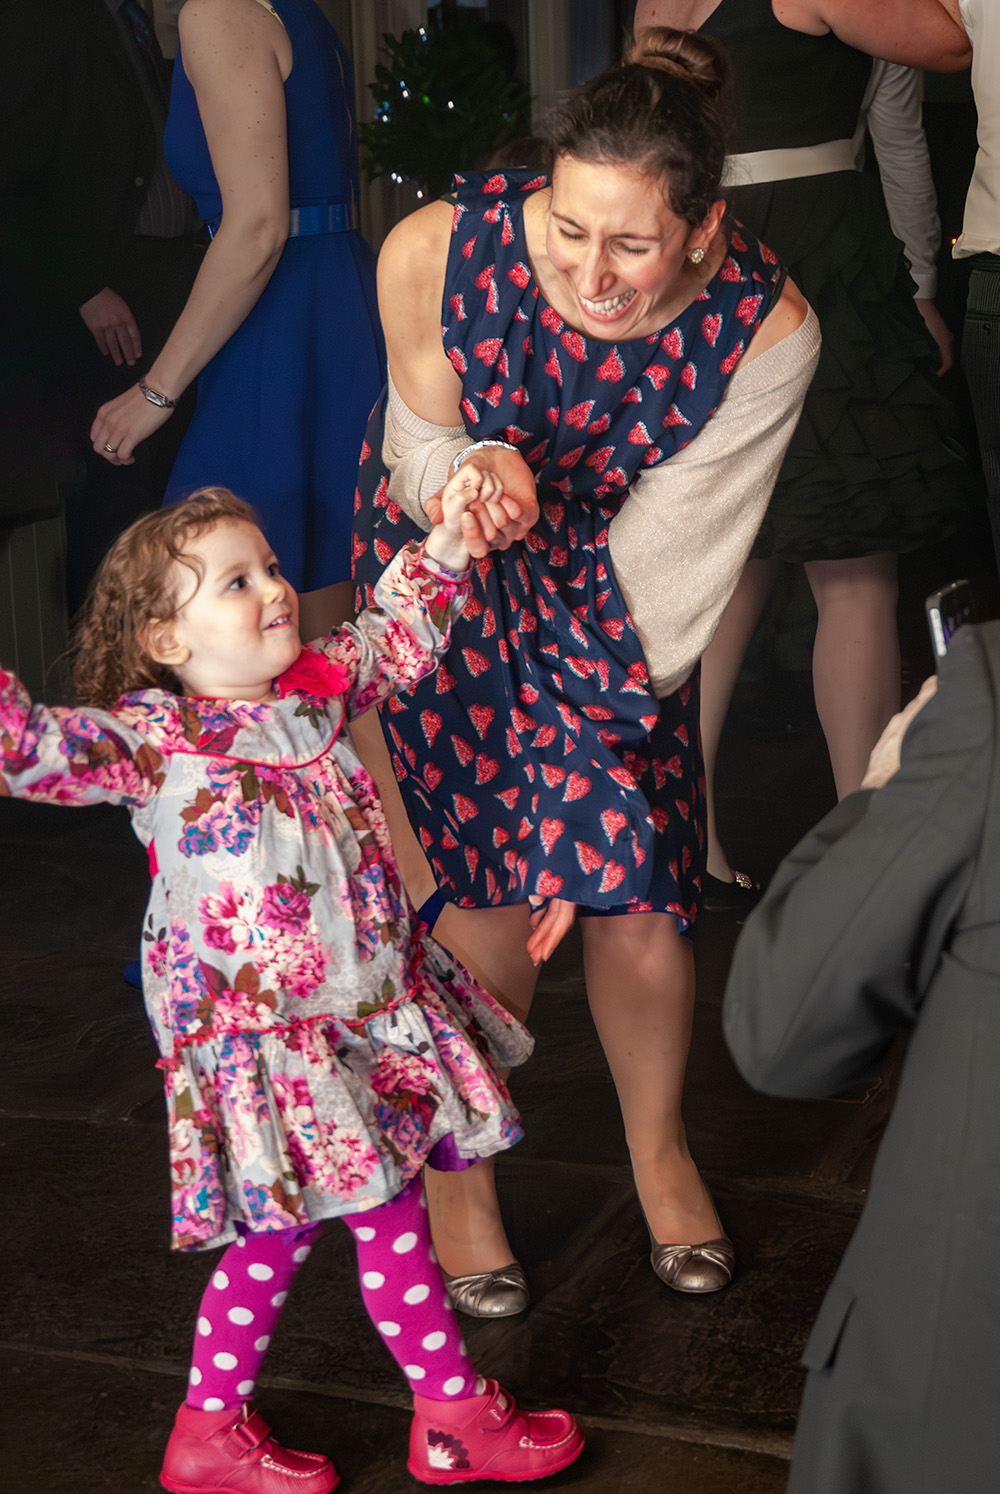 Child and mother having fun at a party